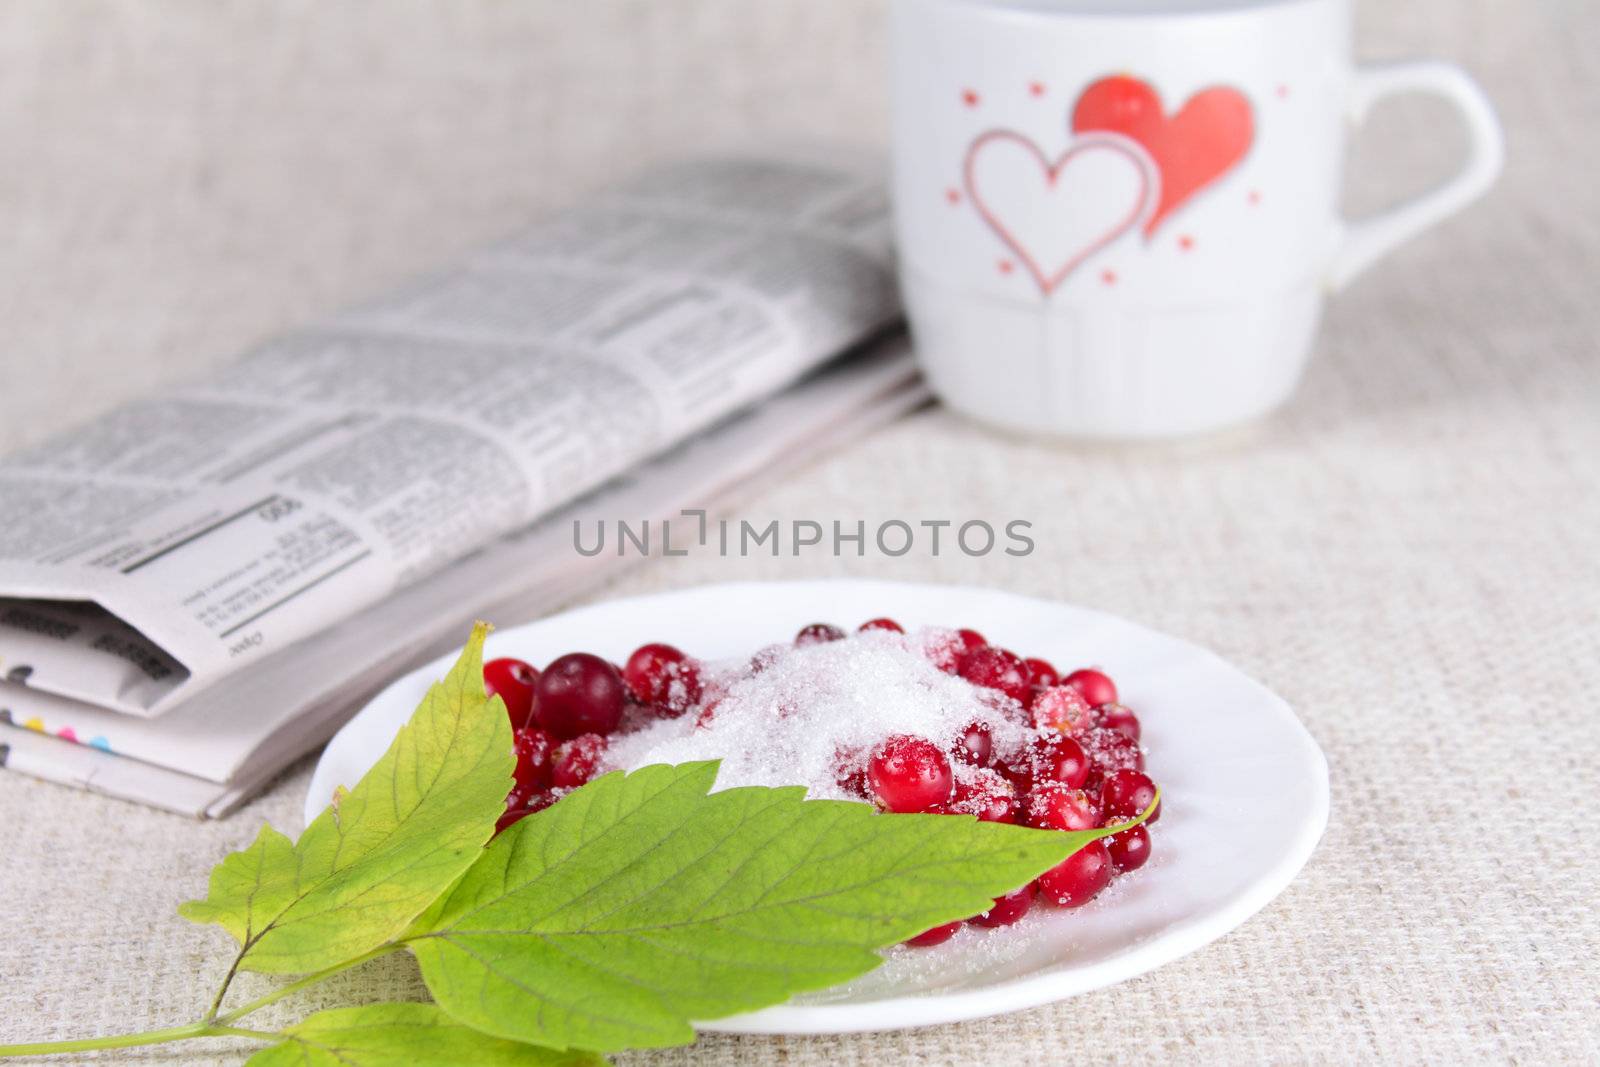 Cowberry in sugar against a mug with hearts and the newspaper removed close up